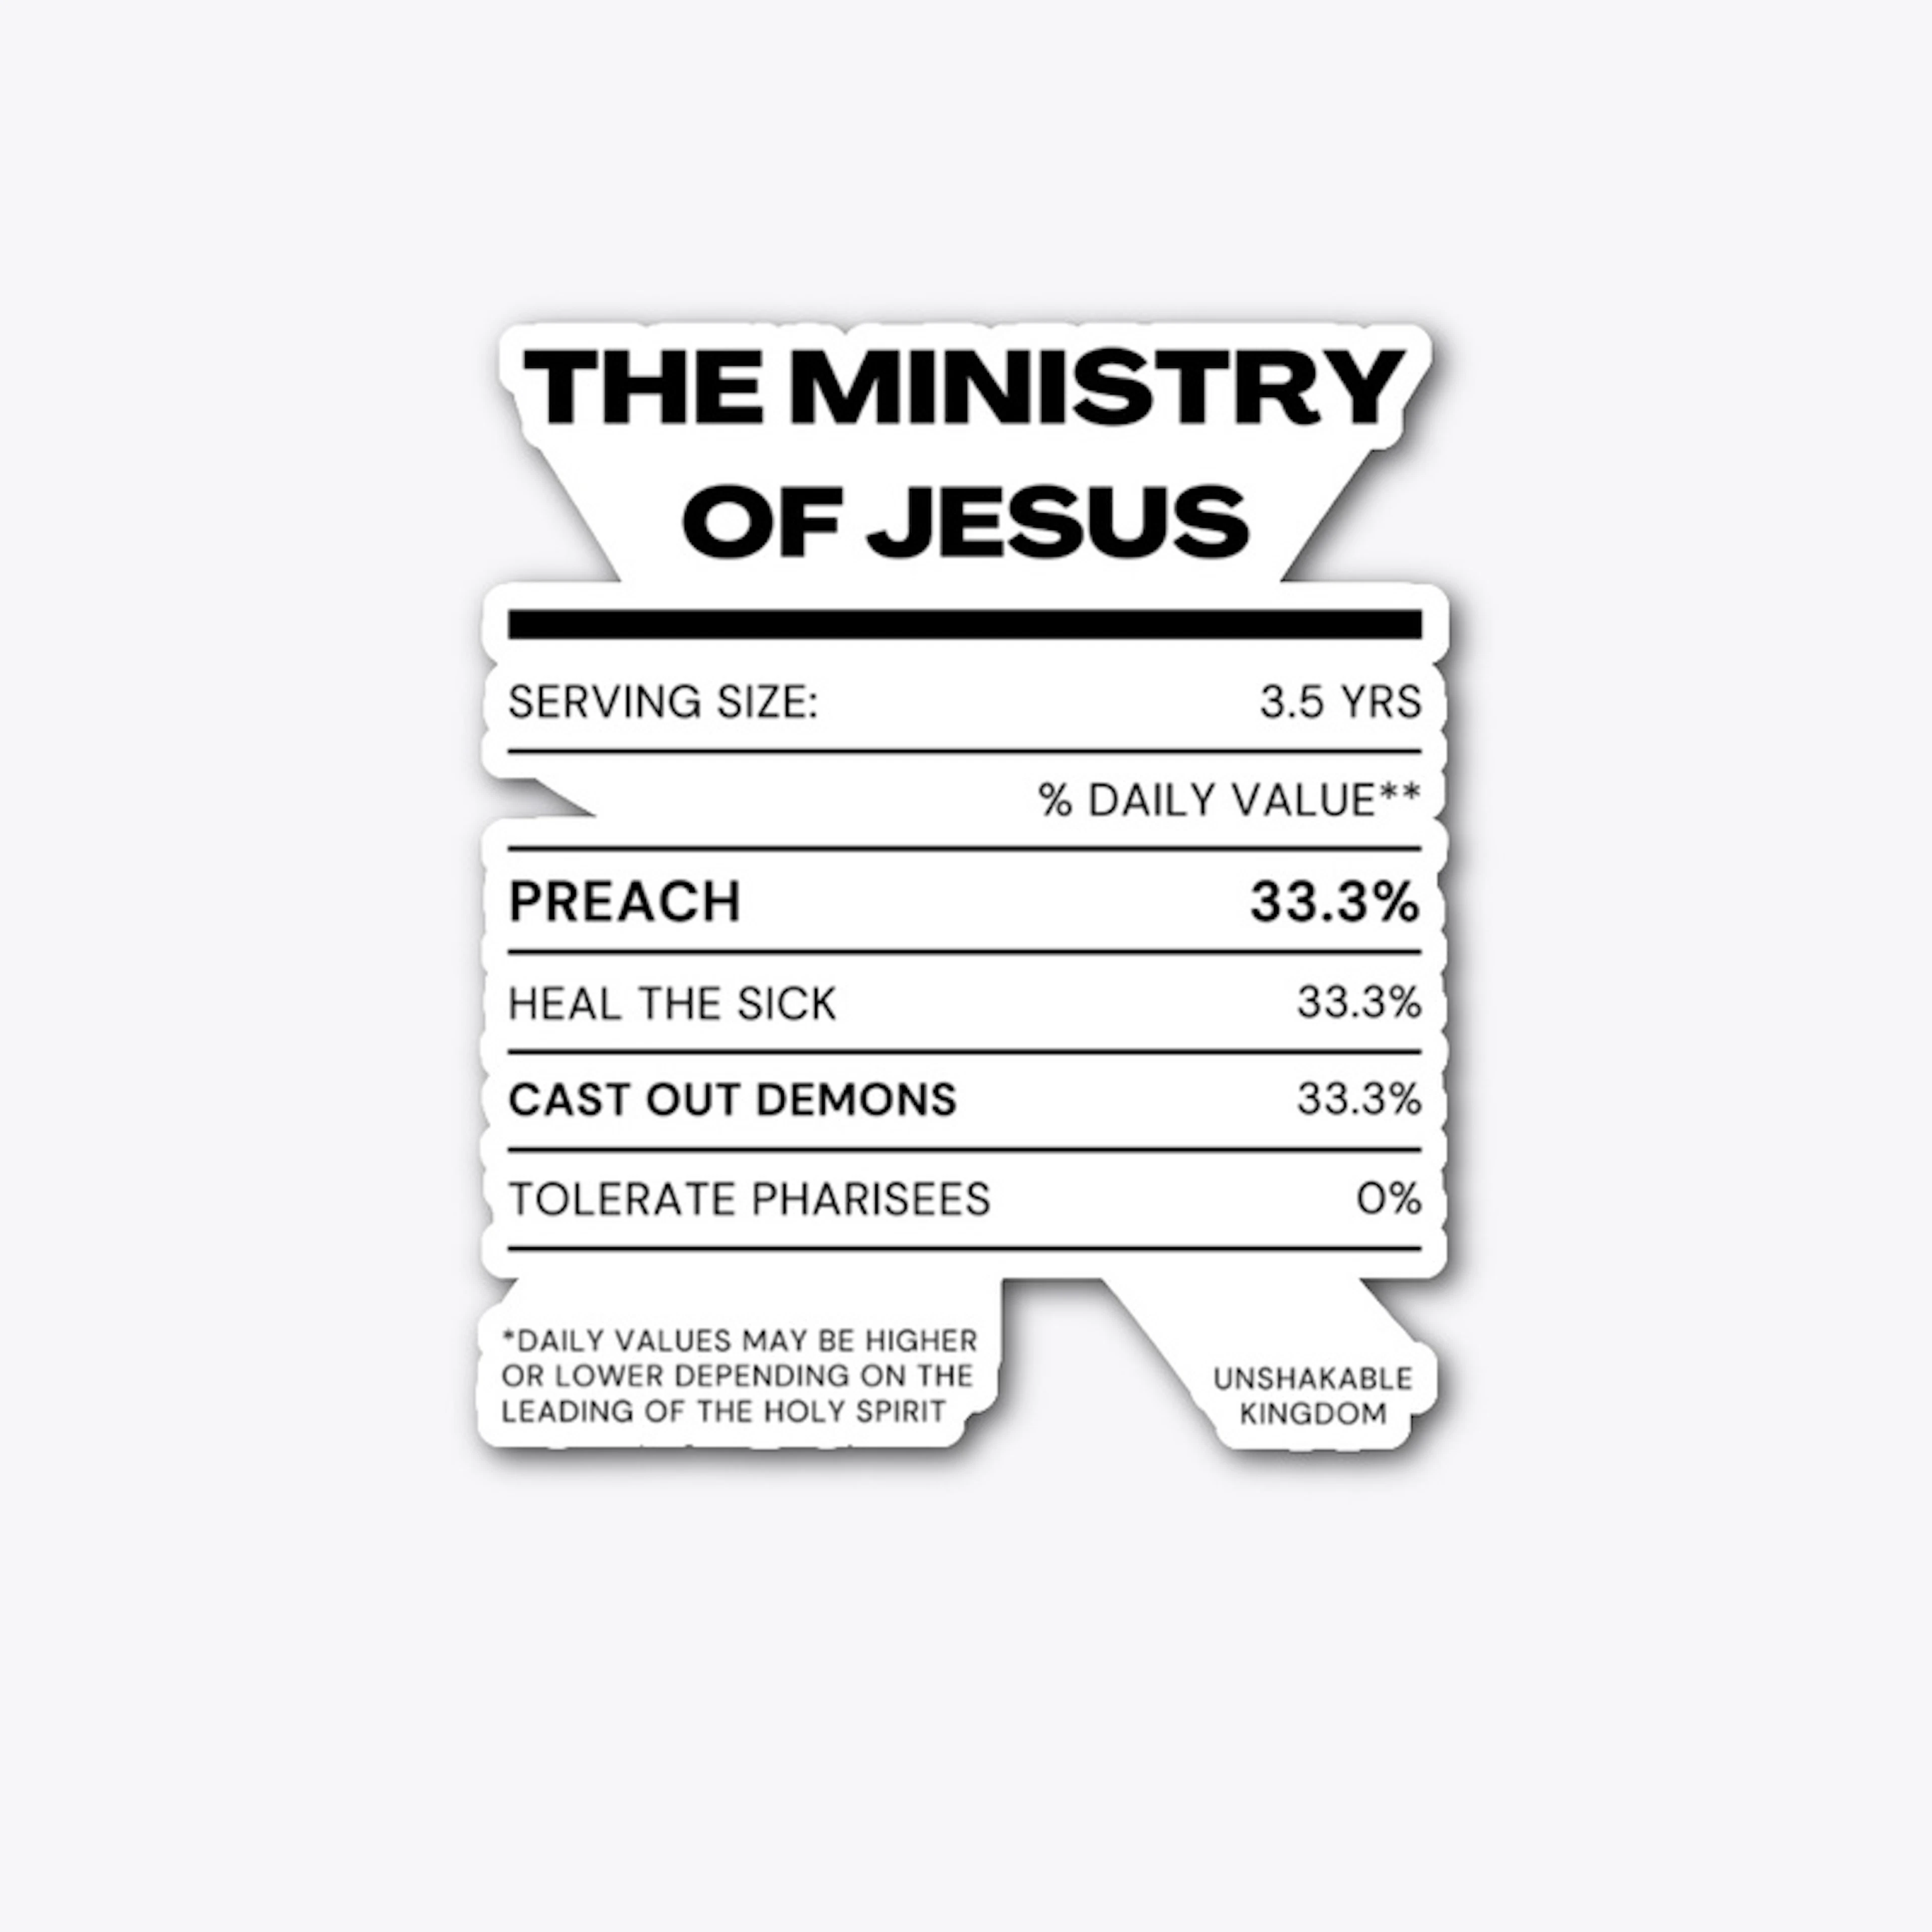 THE MINISTRY OF JESUS